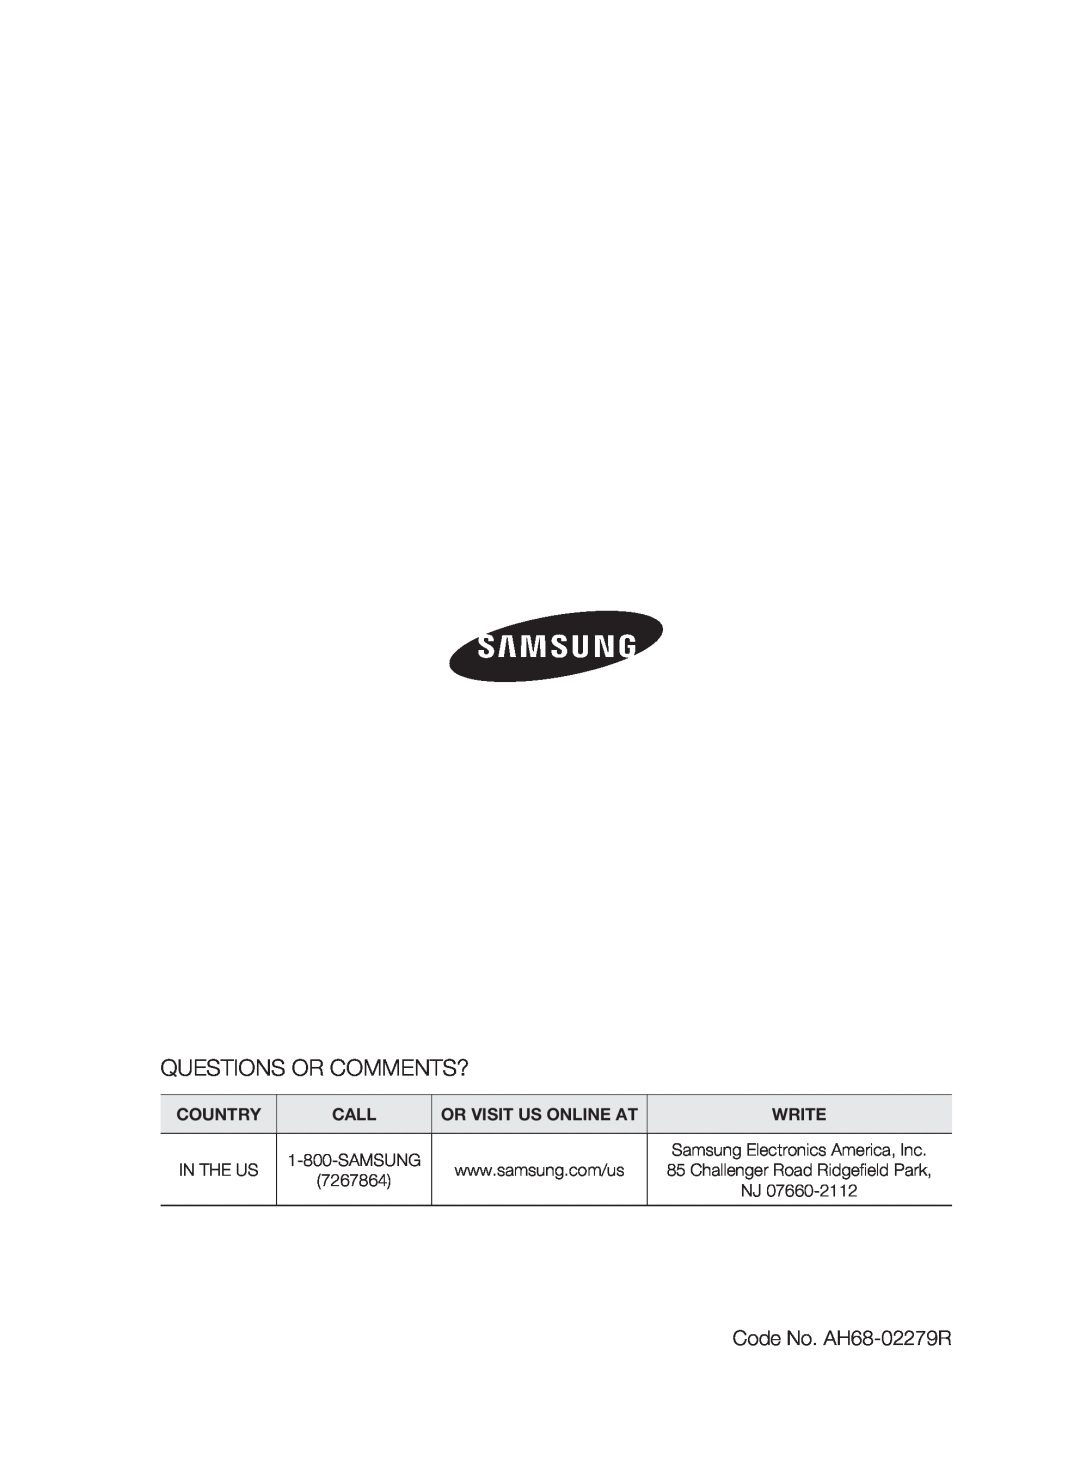 Samsung user manual Questions Or Comments?, Code No. AH68-02279R, Country, Call, Or Visit Us Online At, Write 